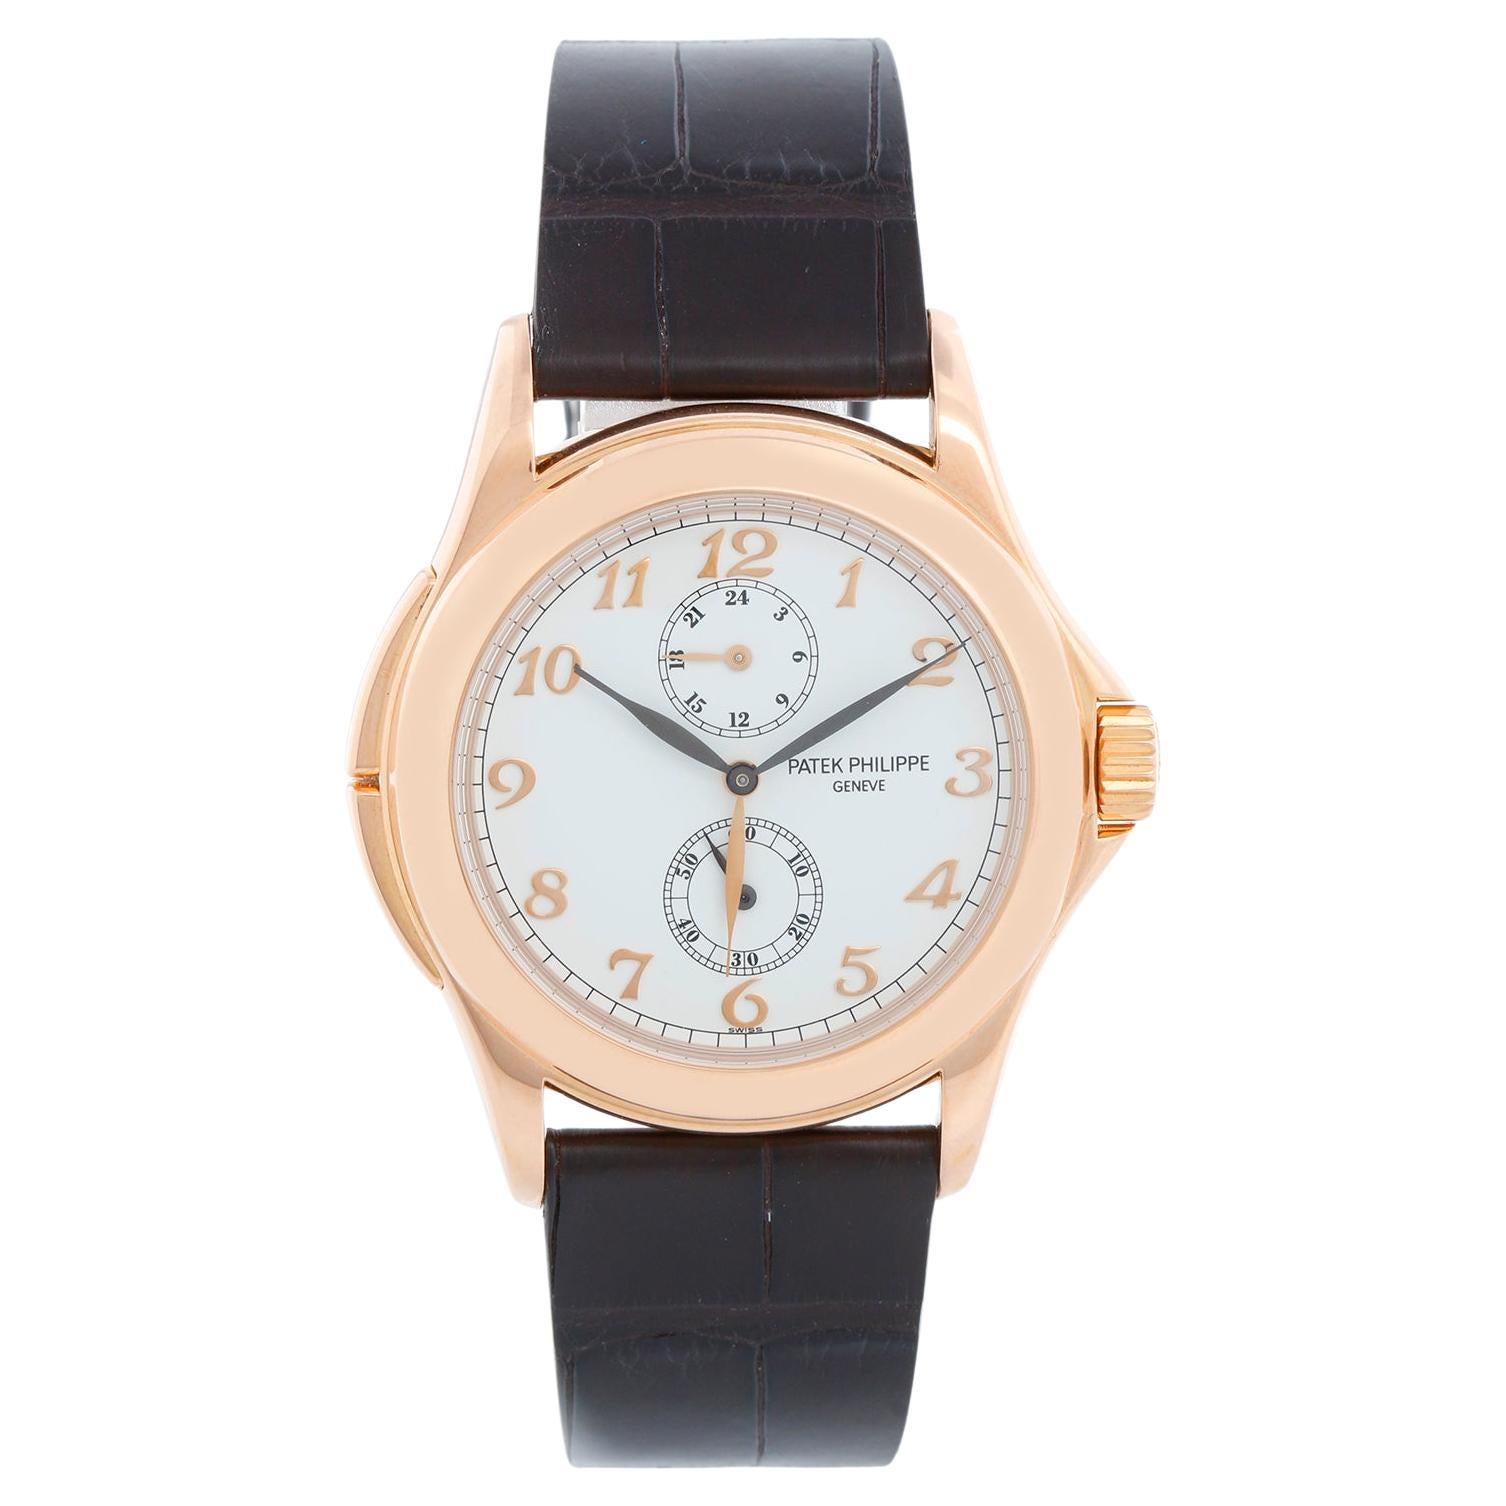 The Collective Patek Philippe Travel Time Men's 18k Rose Gold Watch 5134 R or 5134R en vente